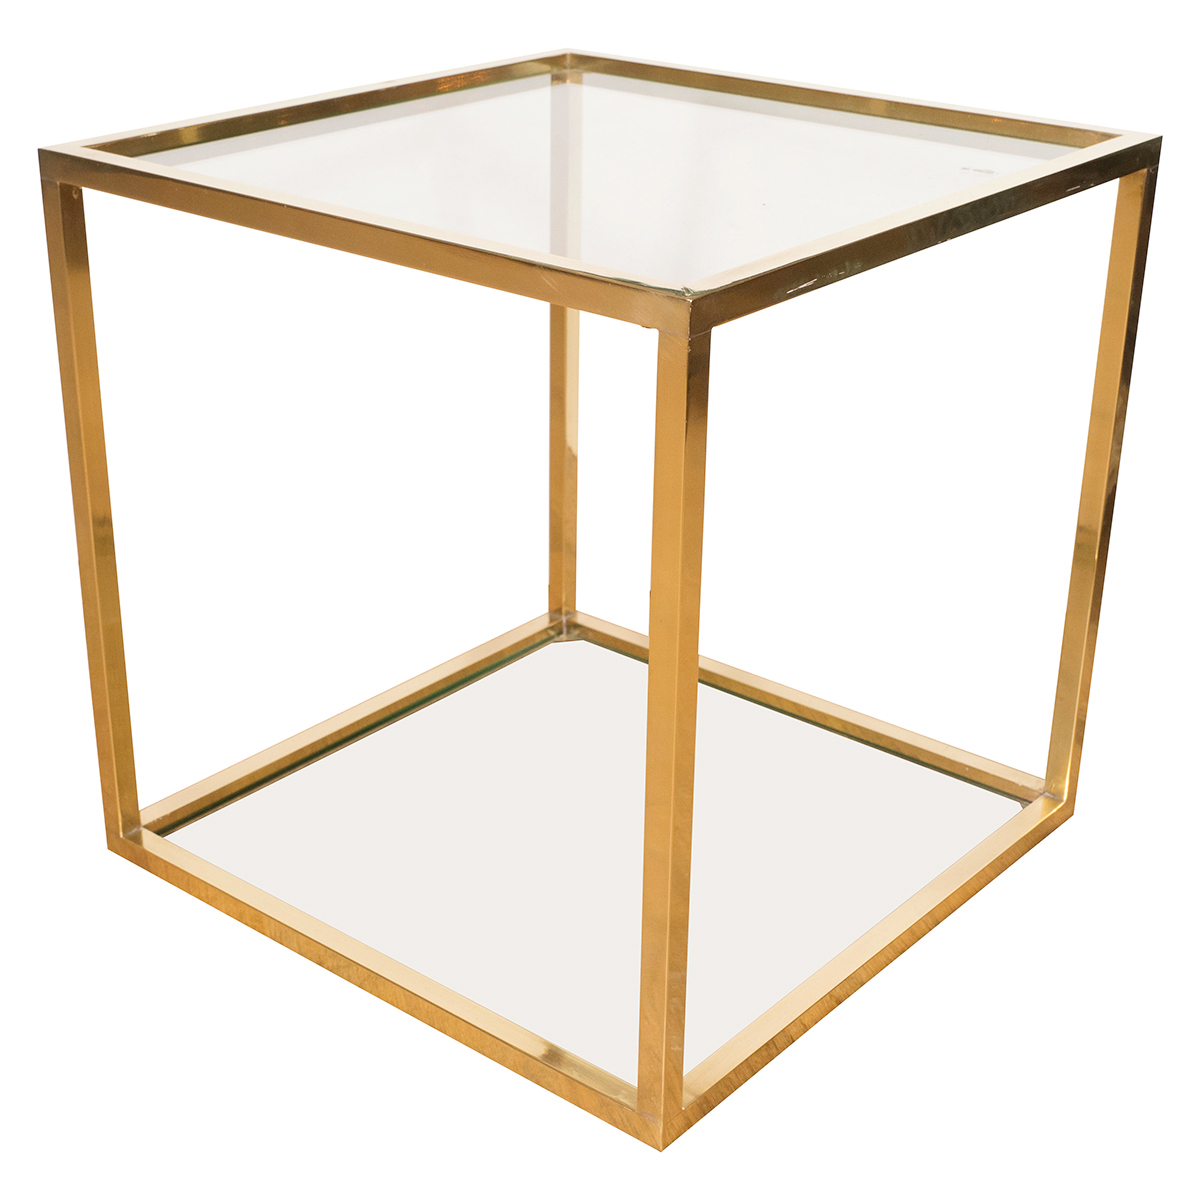 Petite Square Brass Glass Side Table, Square Glass End Table